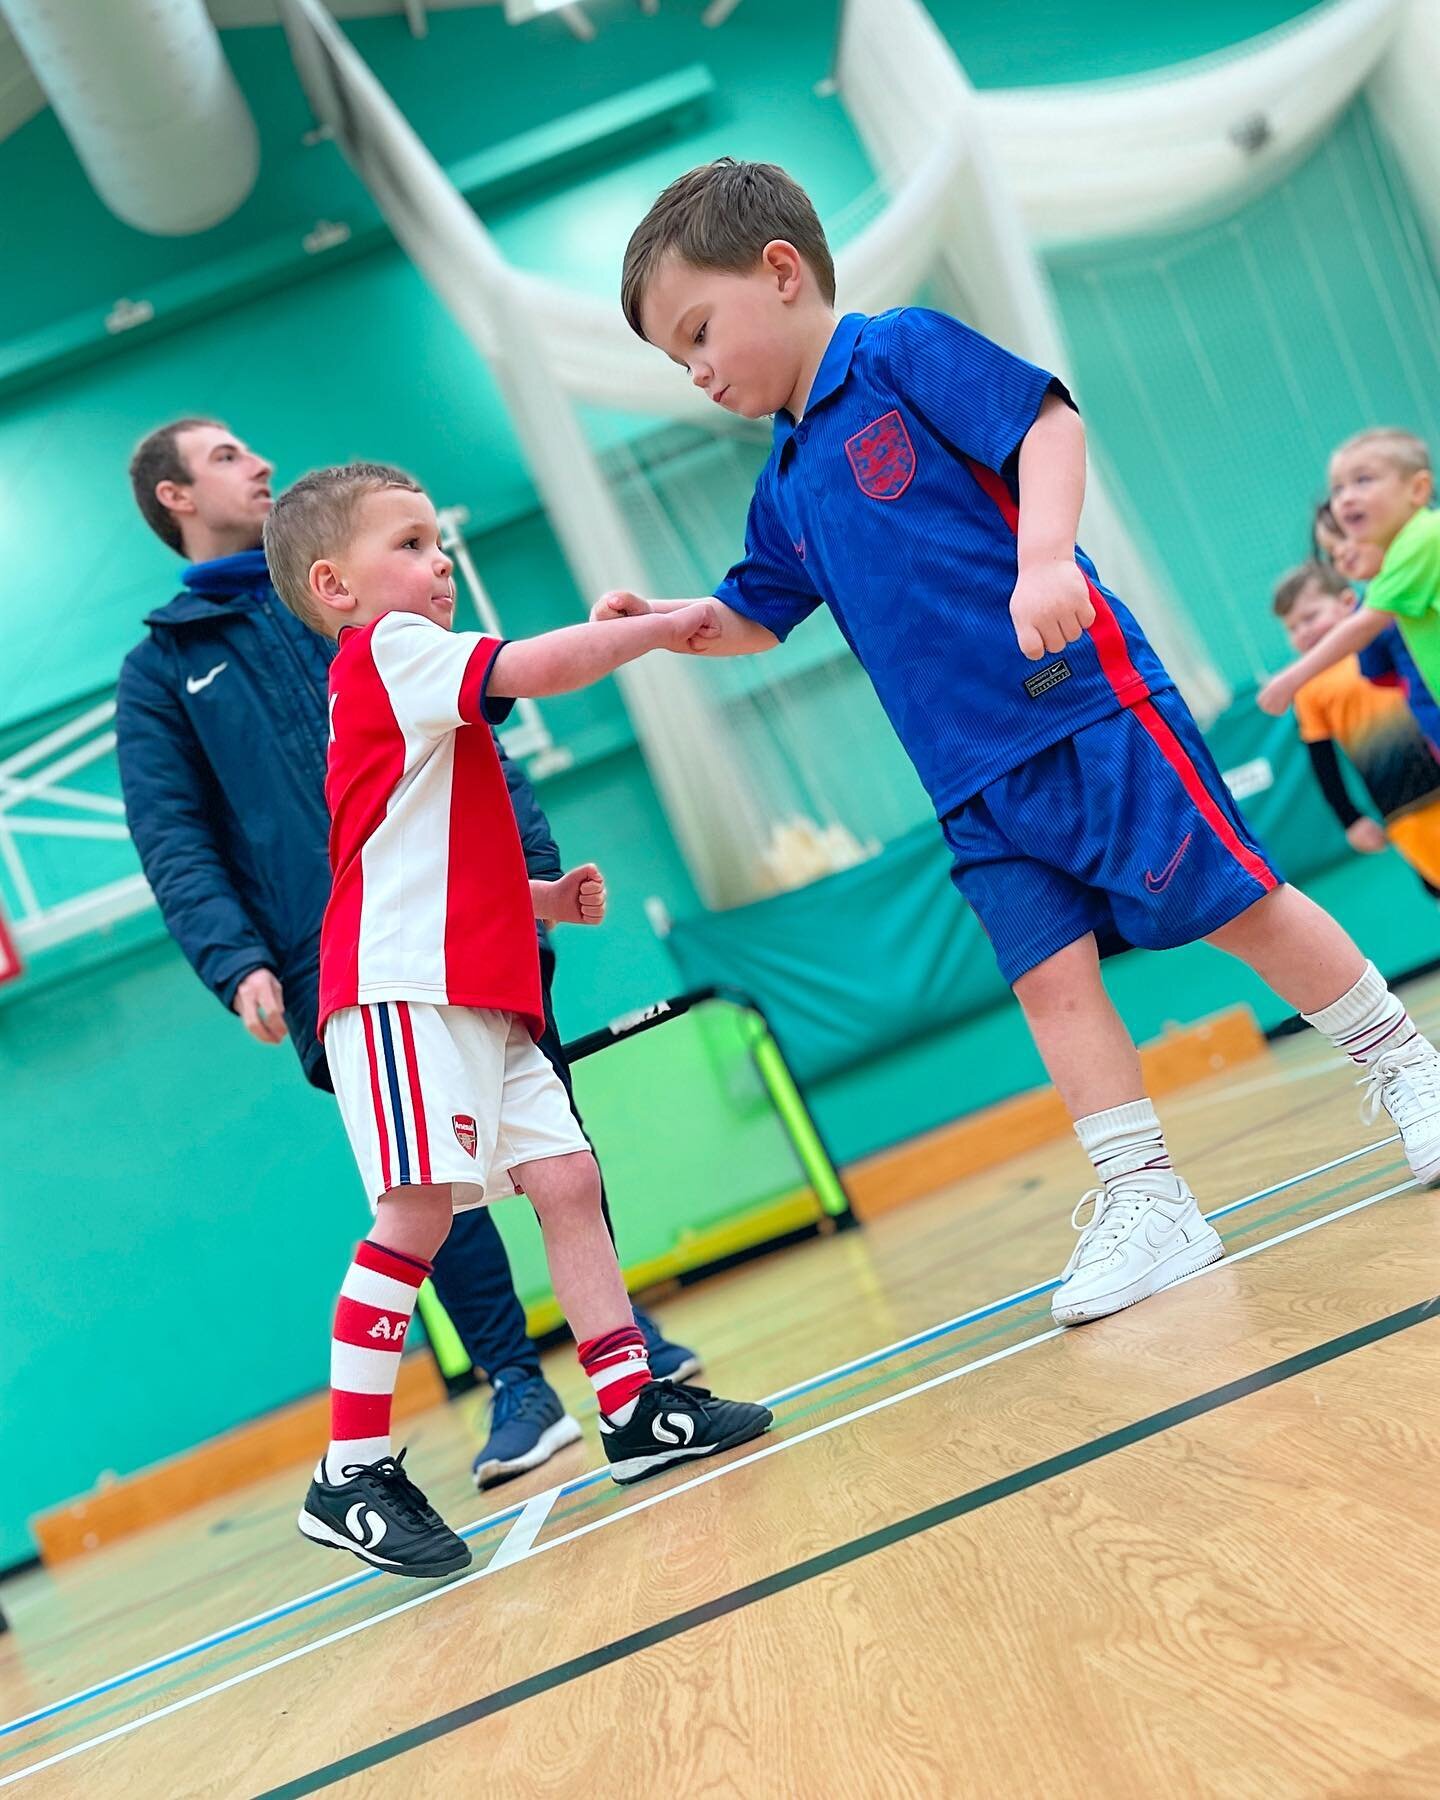 A little sportsmanship goes a long way! 

If your little ones have energy to burn and would love the opportunity run around, in a safe, play-oriented setting, that would introduce them to the basics of football&hellip; then these classes are for you.